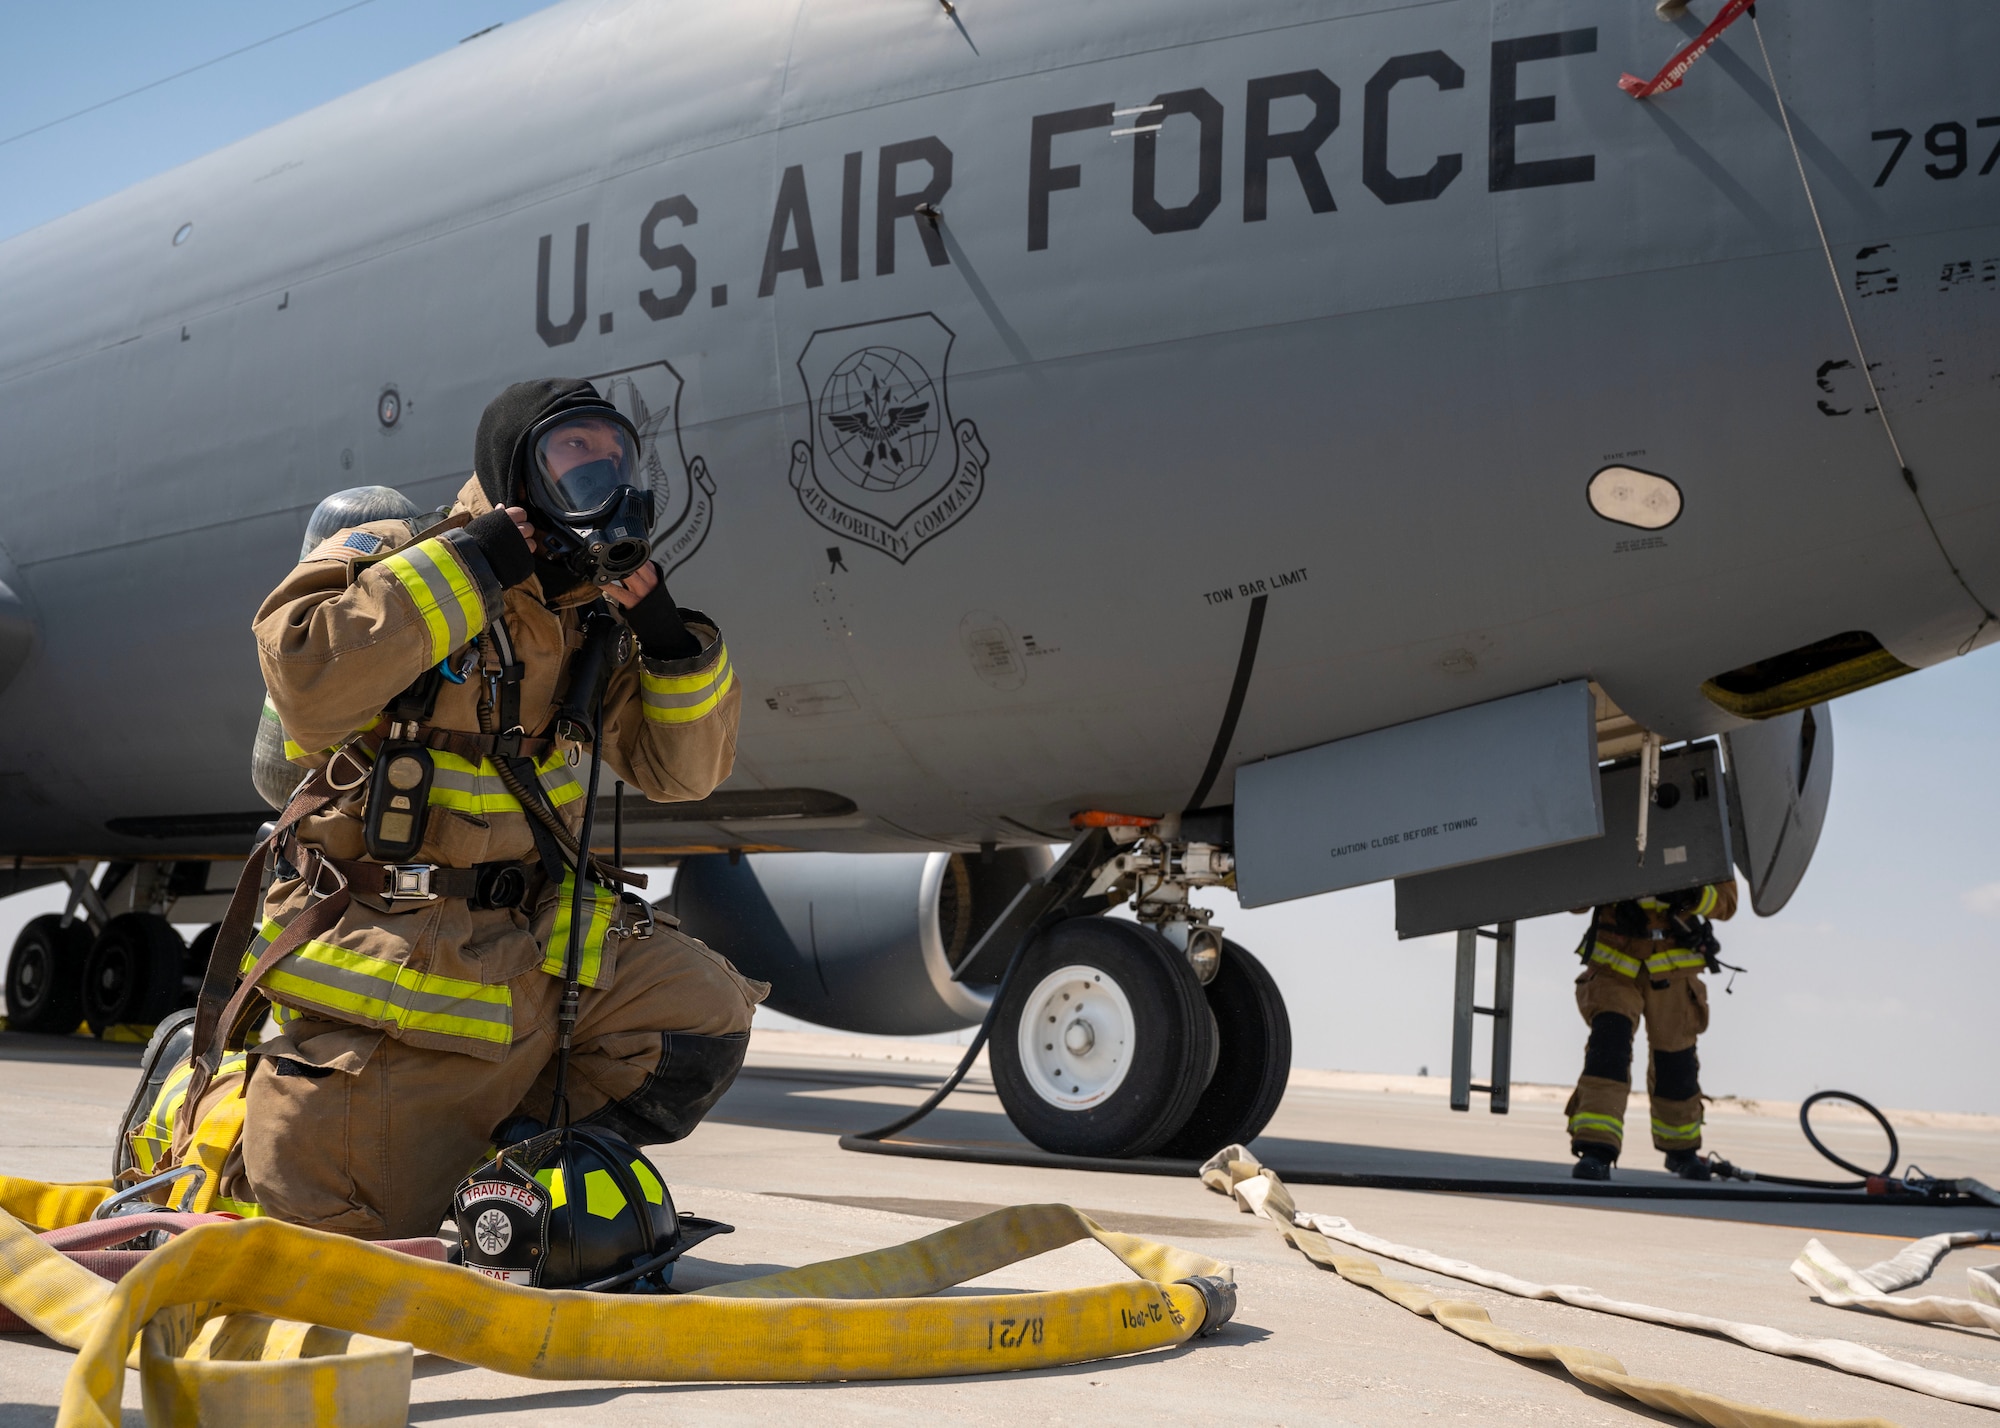 U.S. Air Force firefighter dawns on equipment during an aircraft mishap exercise at an undisclosed location in the U.S. Central Command area of responsibility, Feb. 29, 2024. Aircraft mishap exercises are vital for ensuring the Air Force's readiness, continuous improvement, and ability to mitigate risks, fostering coordination, community safety, and mission assurance in the face of potential emergencies. (U.S. Air Force Courtesy Photo)